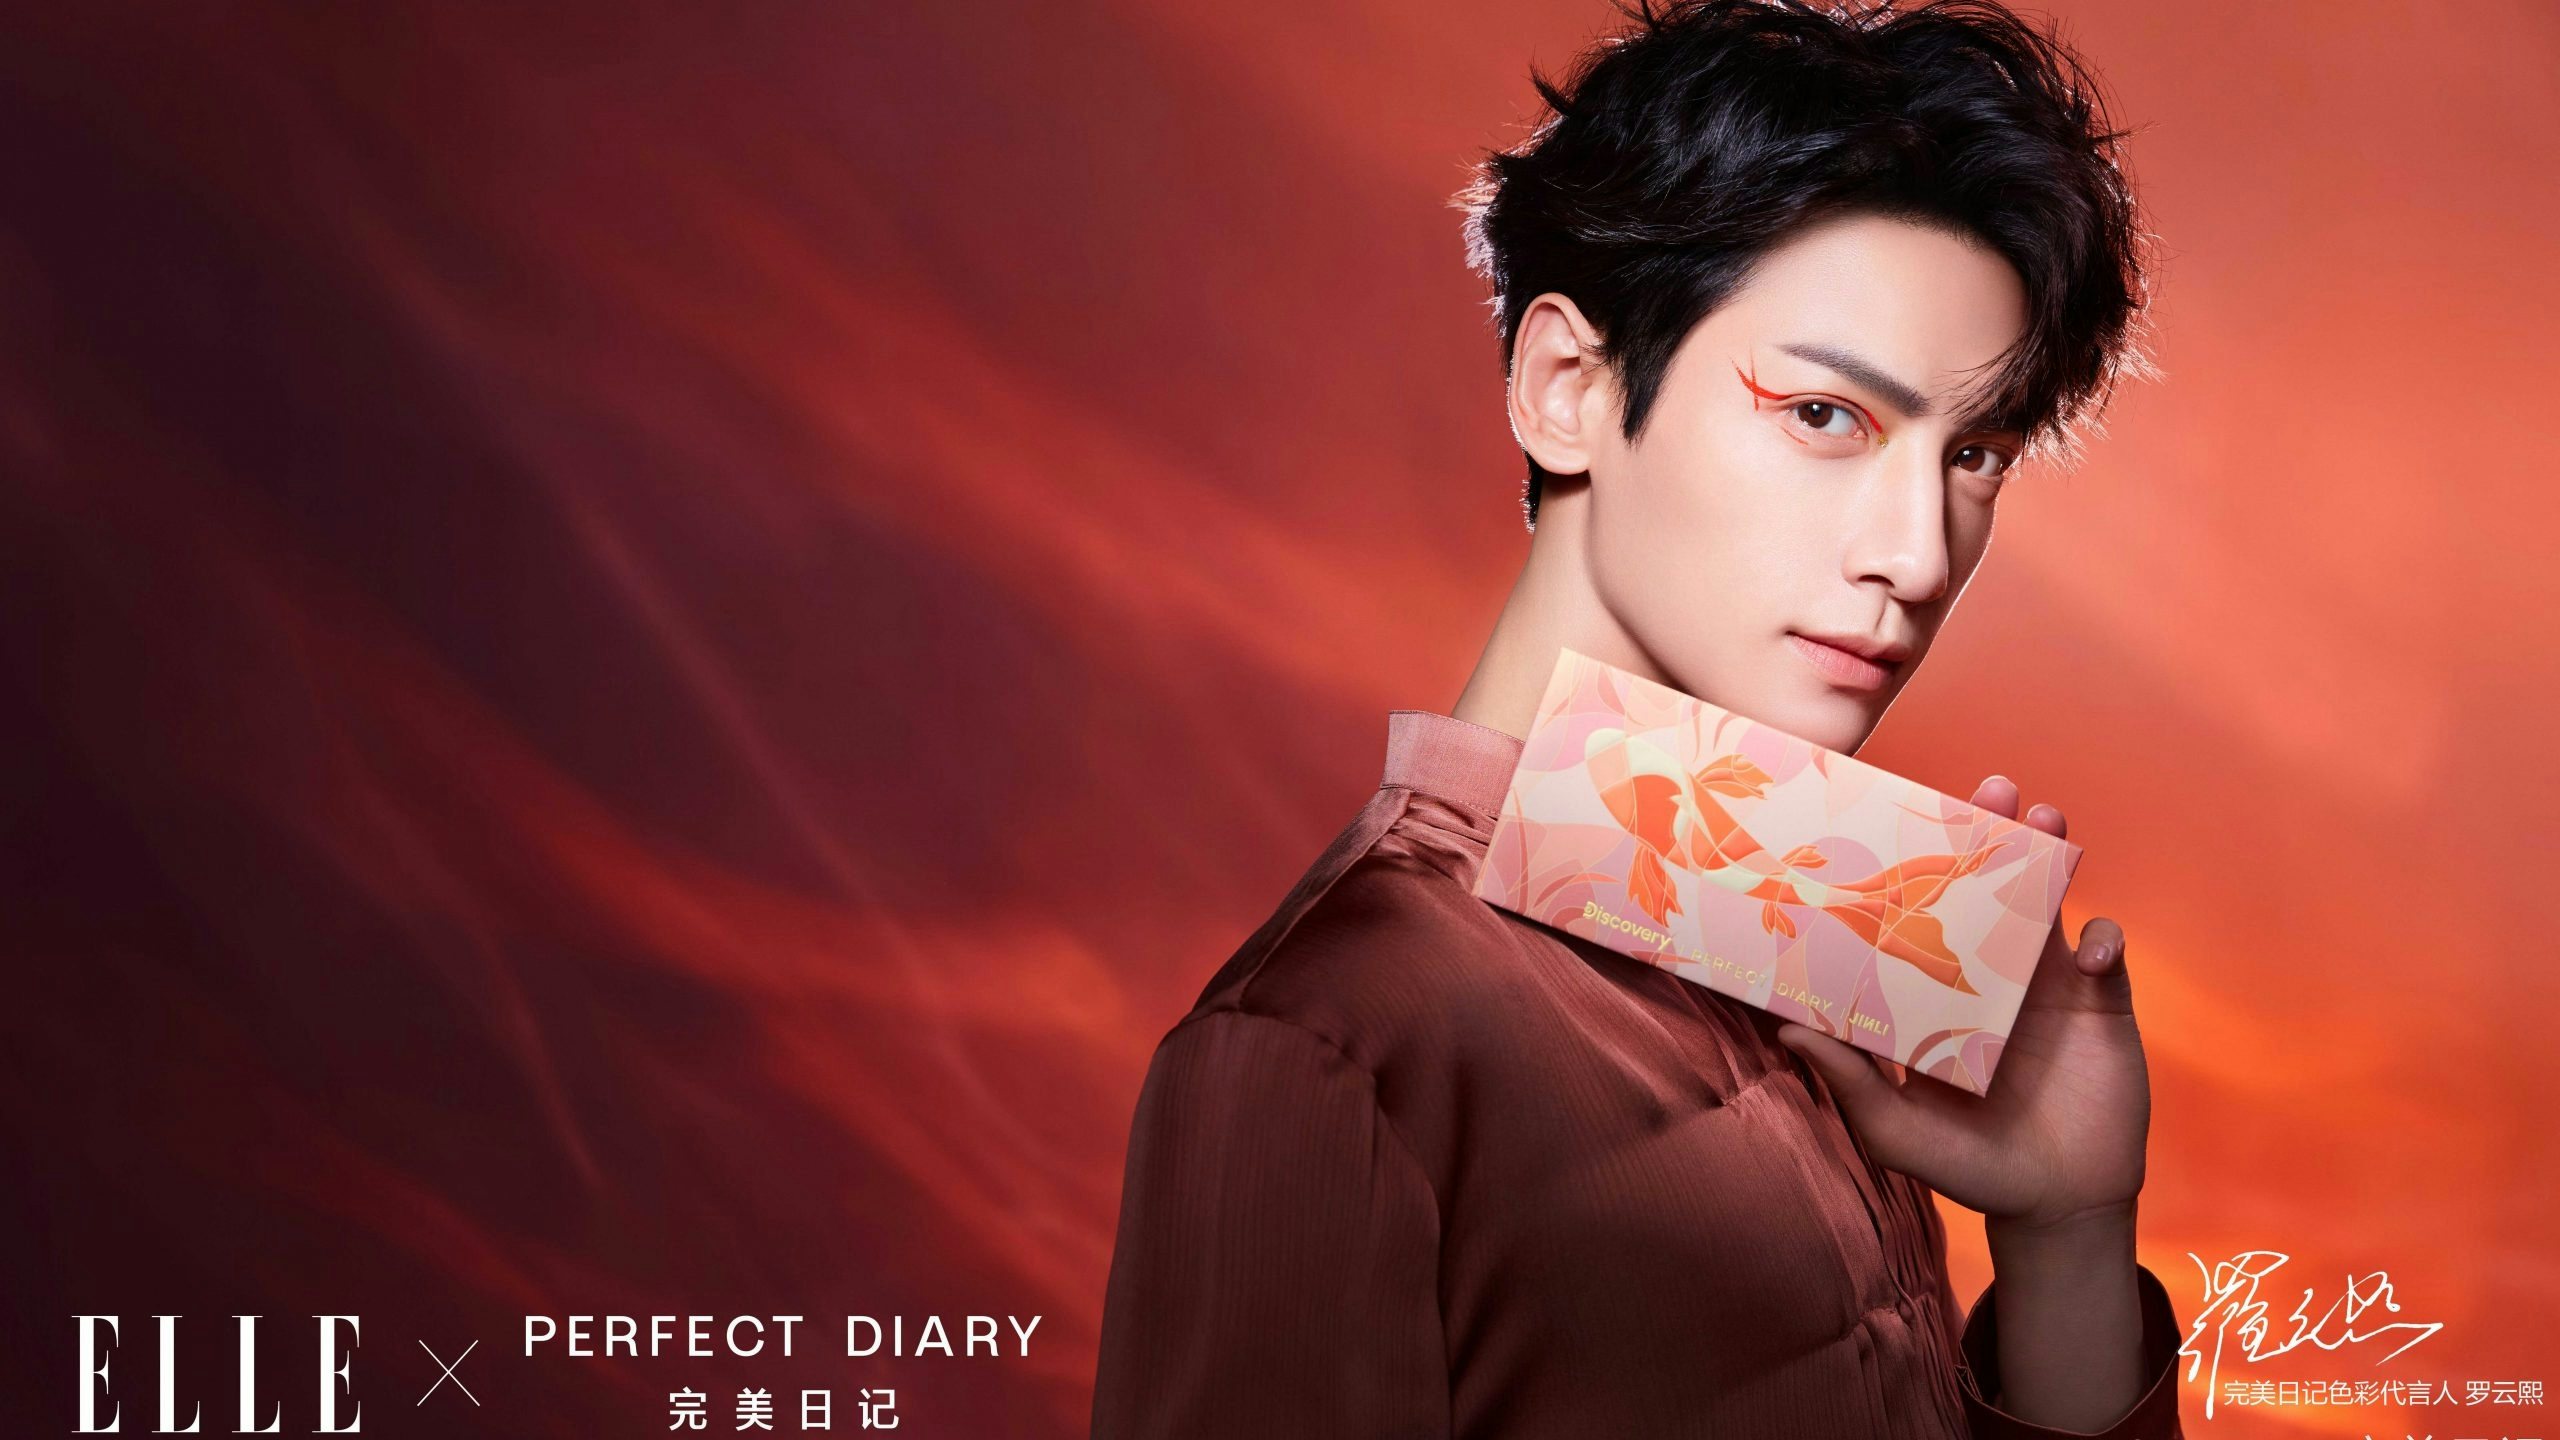 2020 saw many new men’s skincare and makeup brands enter China’s e-commerce space. But what’s behind that growth, and where is the market headed? Photo: Perfect Diary's Weibo.